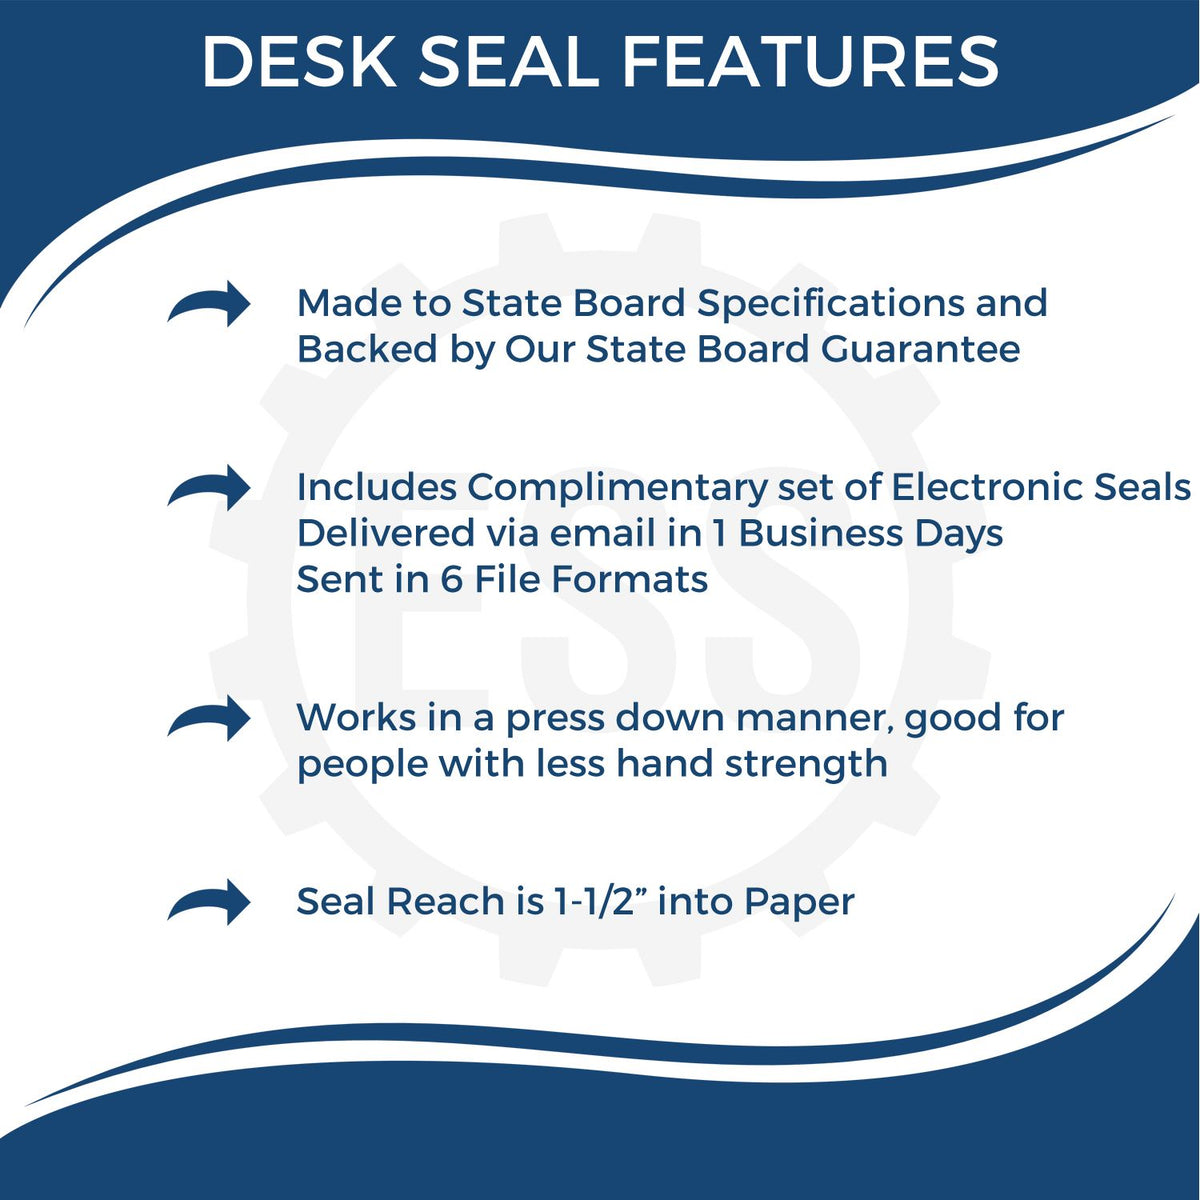 A picture of an infographic highlighting the selling points for the Kansas Geologist Desk Seal